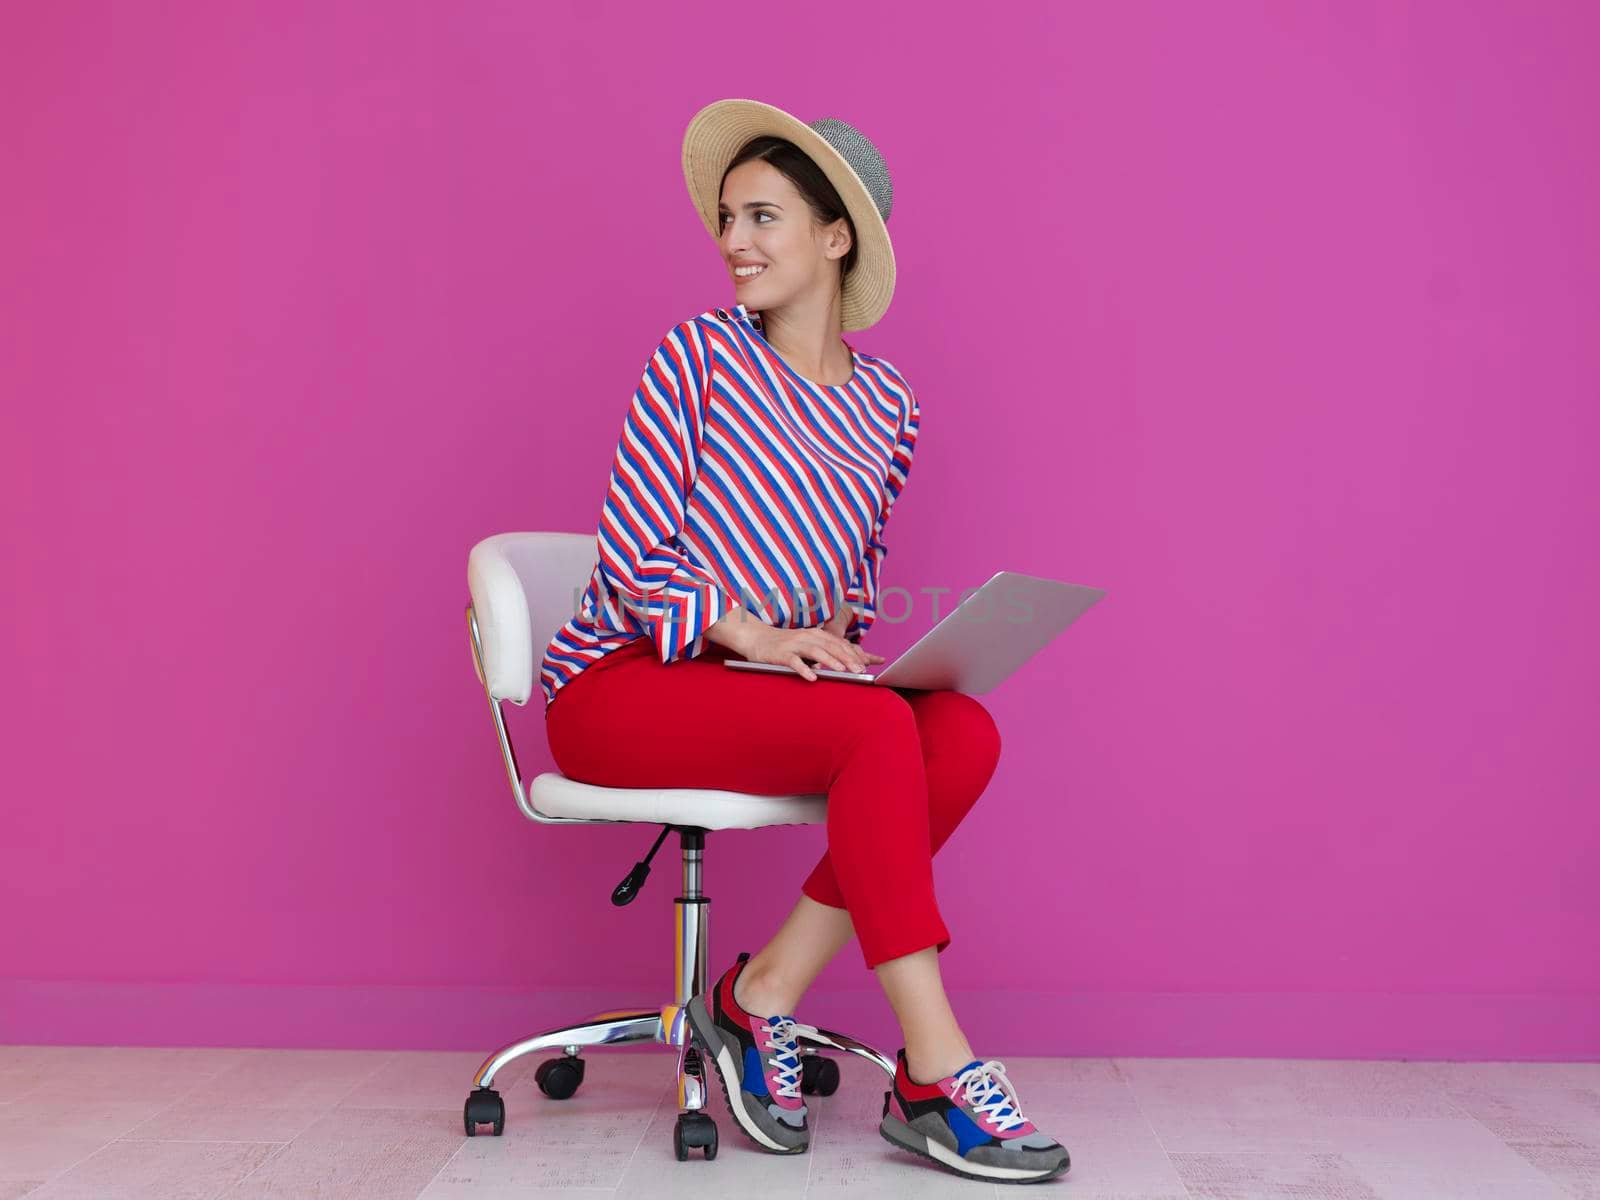 Portrait of young woman sitting on the chair and holding laptop on the lap isolated on pink background. Female model presenting fashion and technologz concept